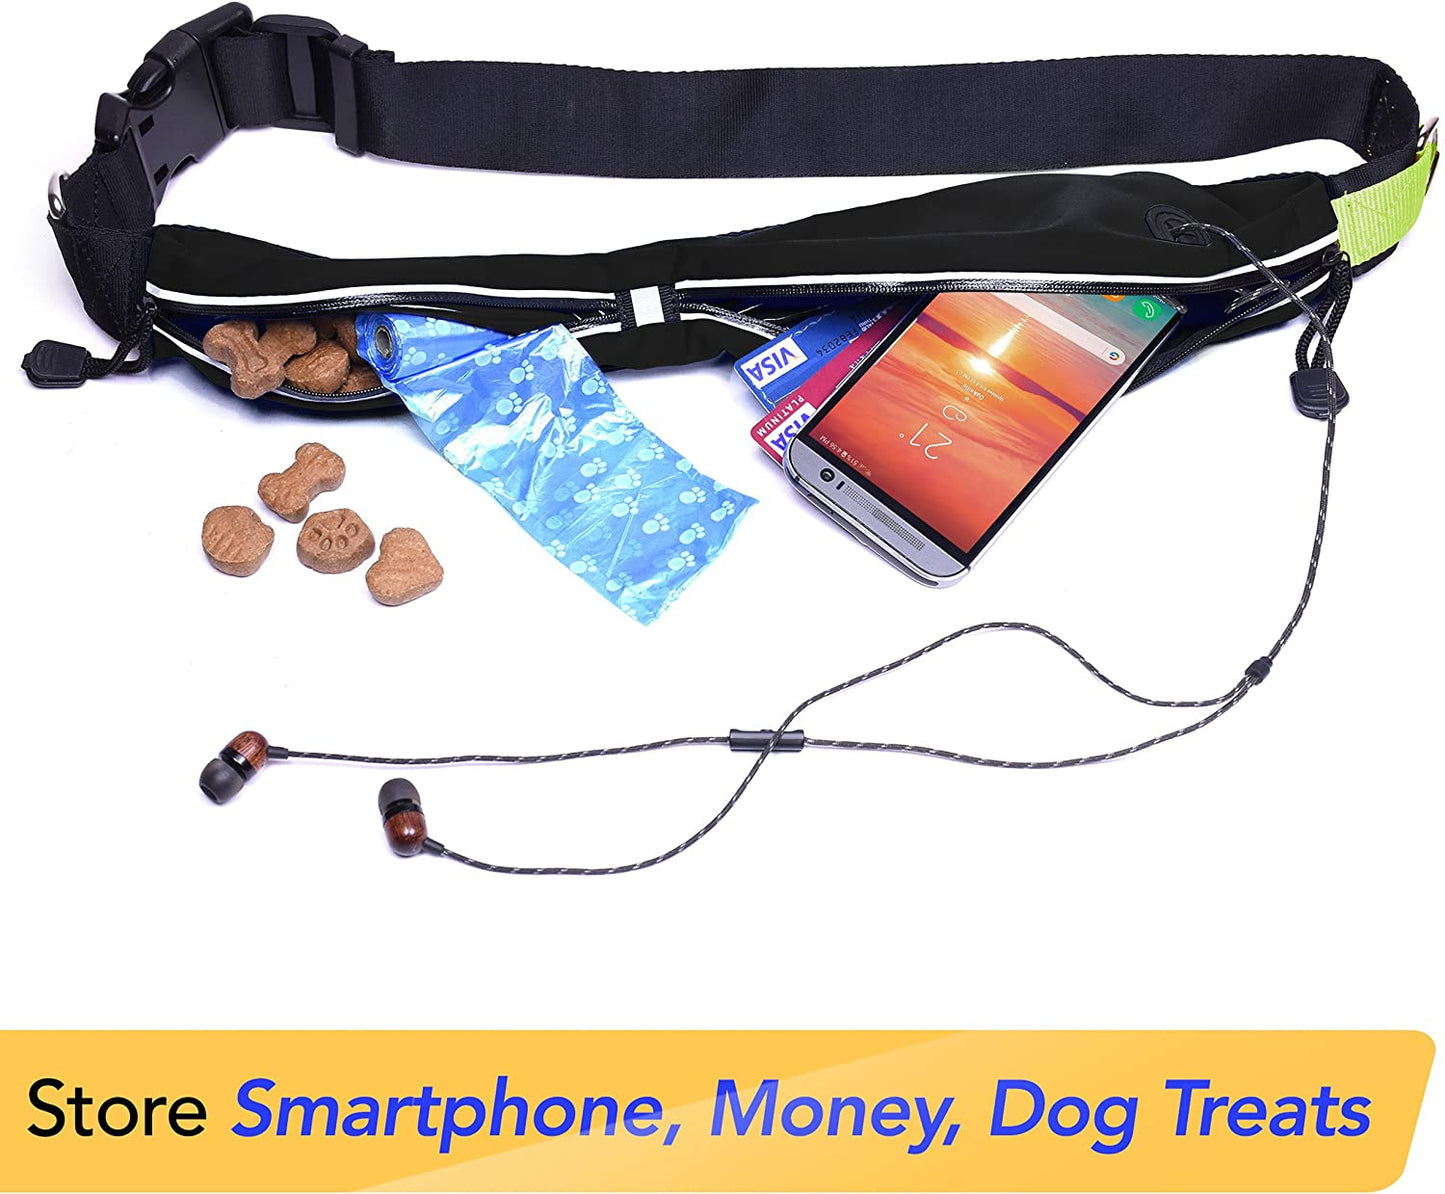 Retractable Hands Free Dog Leash W/Smartphone Pouch – Dual Handle Bungee Waist Leash for up to 150 Lbs Large Dogs